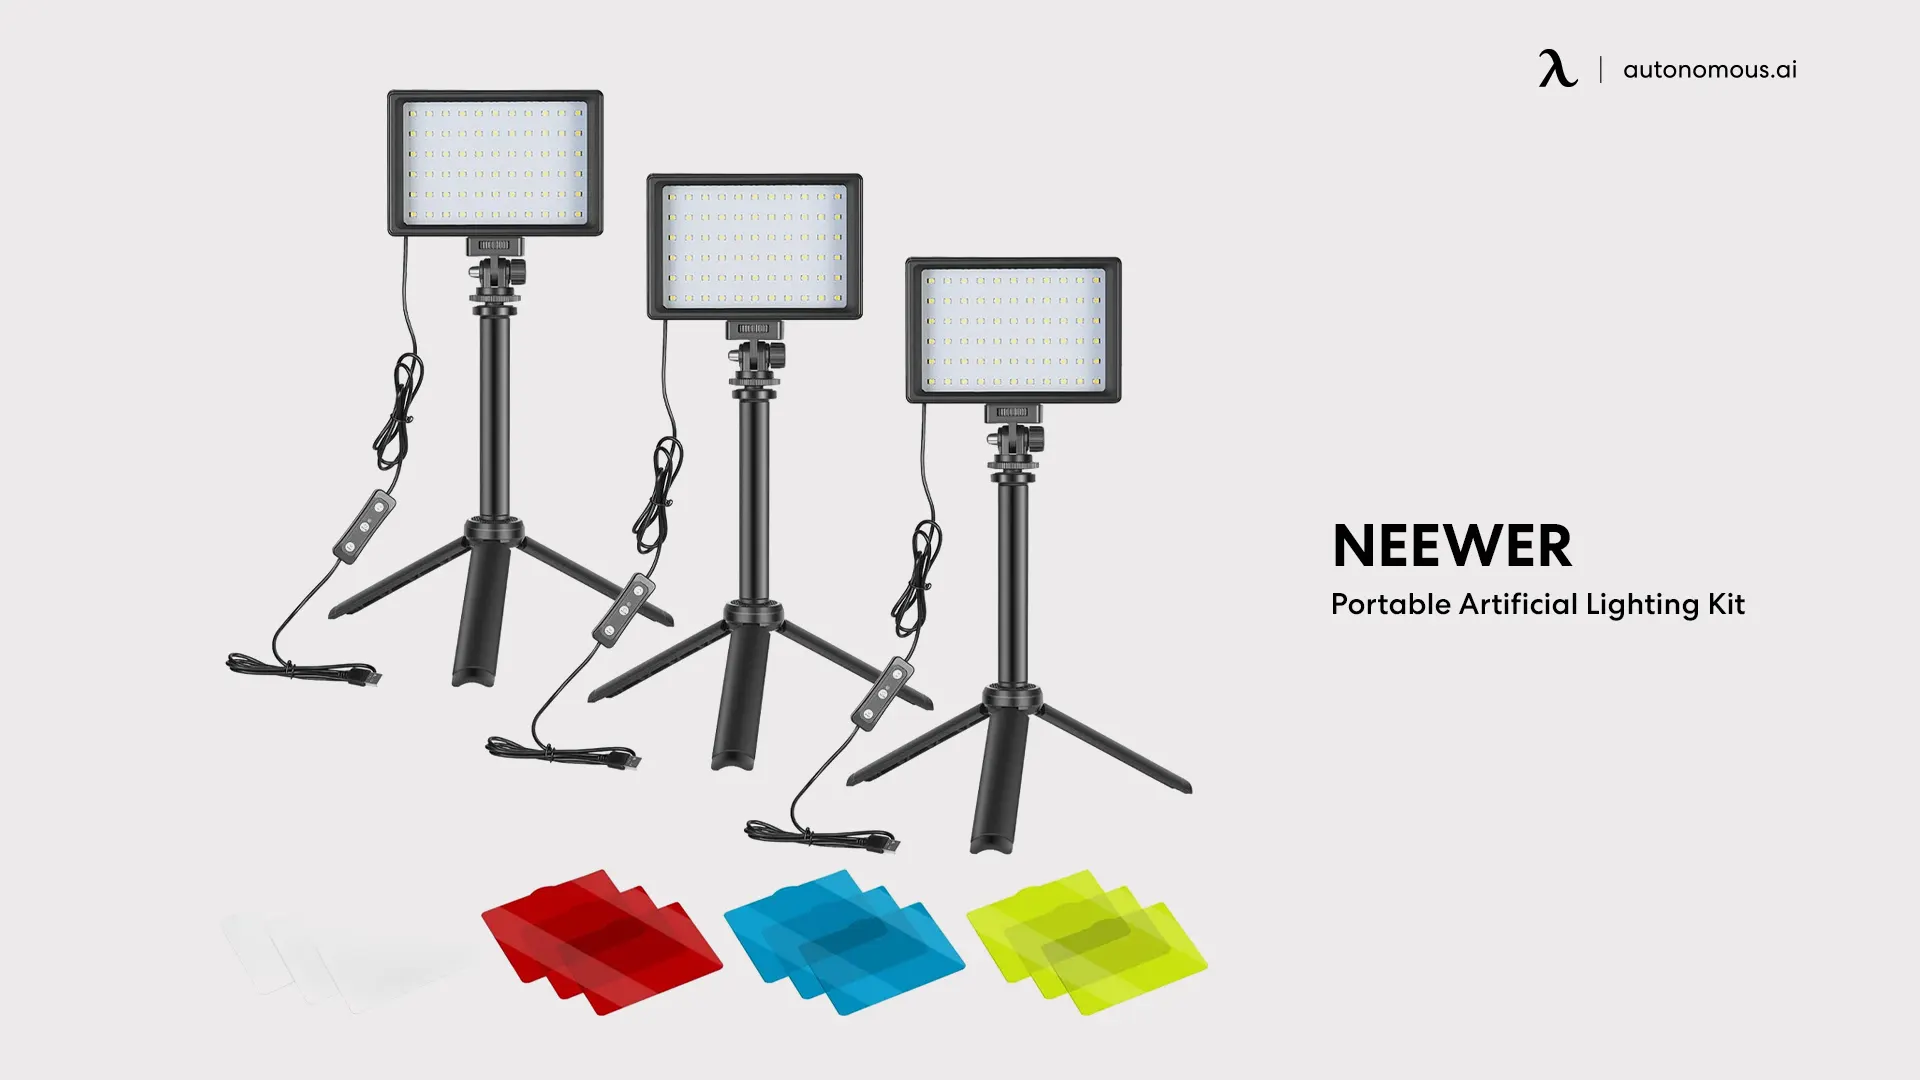 Portable Artificial Lighting Kit from Neewer